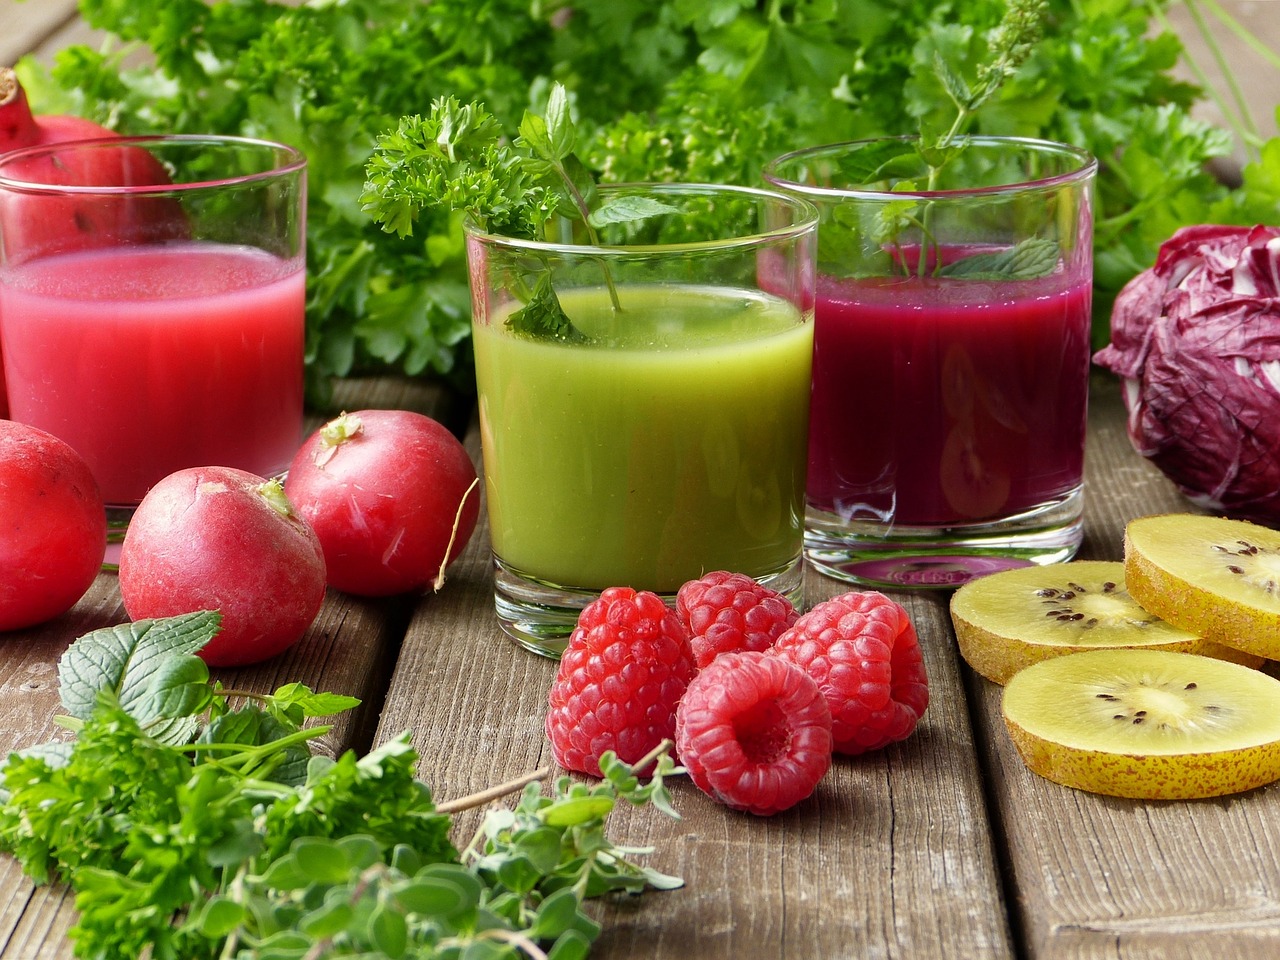 LEGAL REQUIREMENTS OF FRUIT JUICES AND SIMILAR PRODUCTS